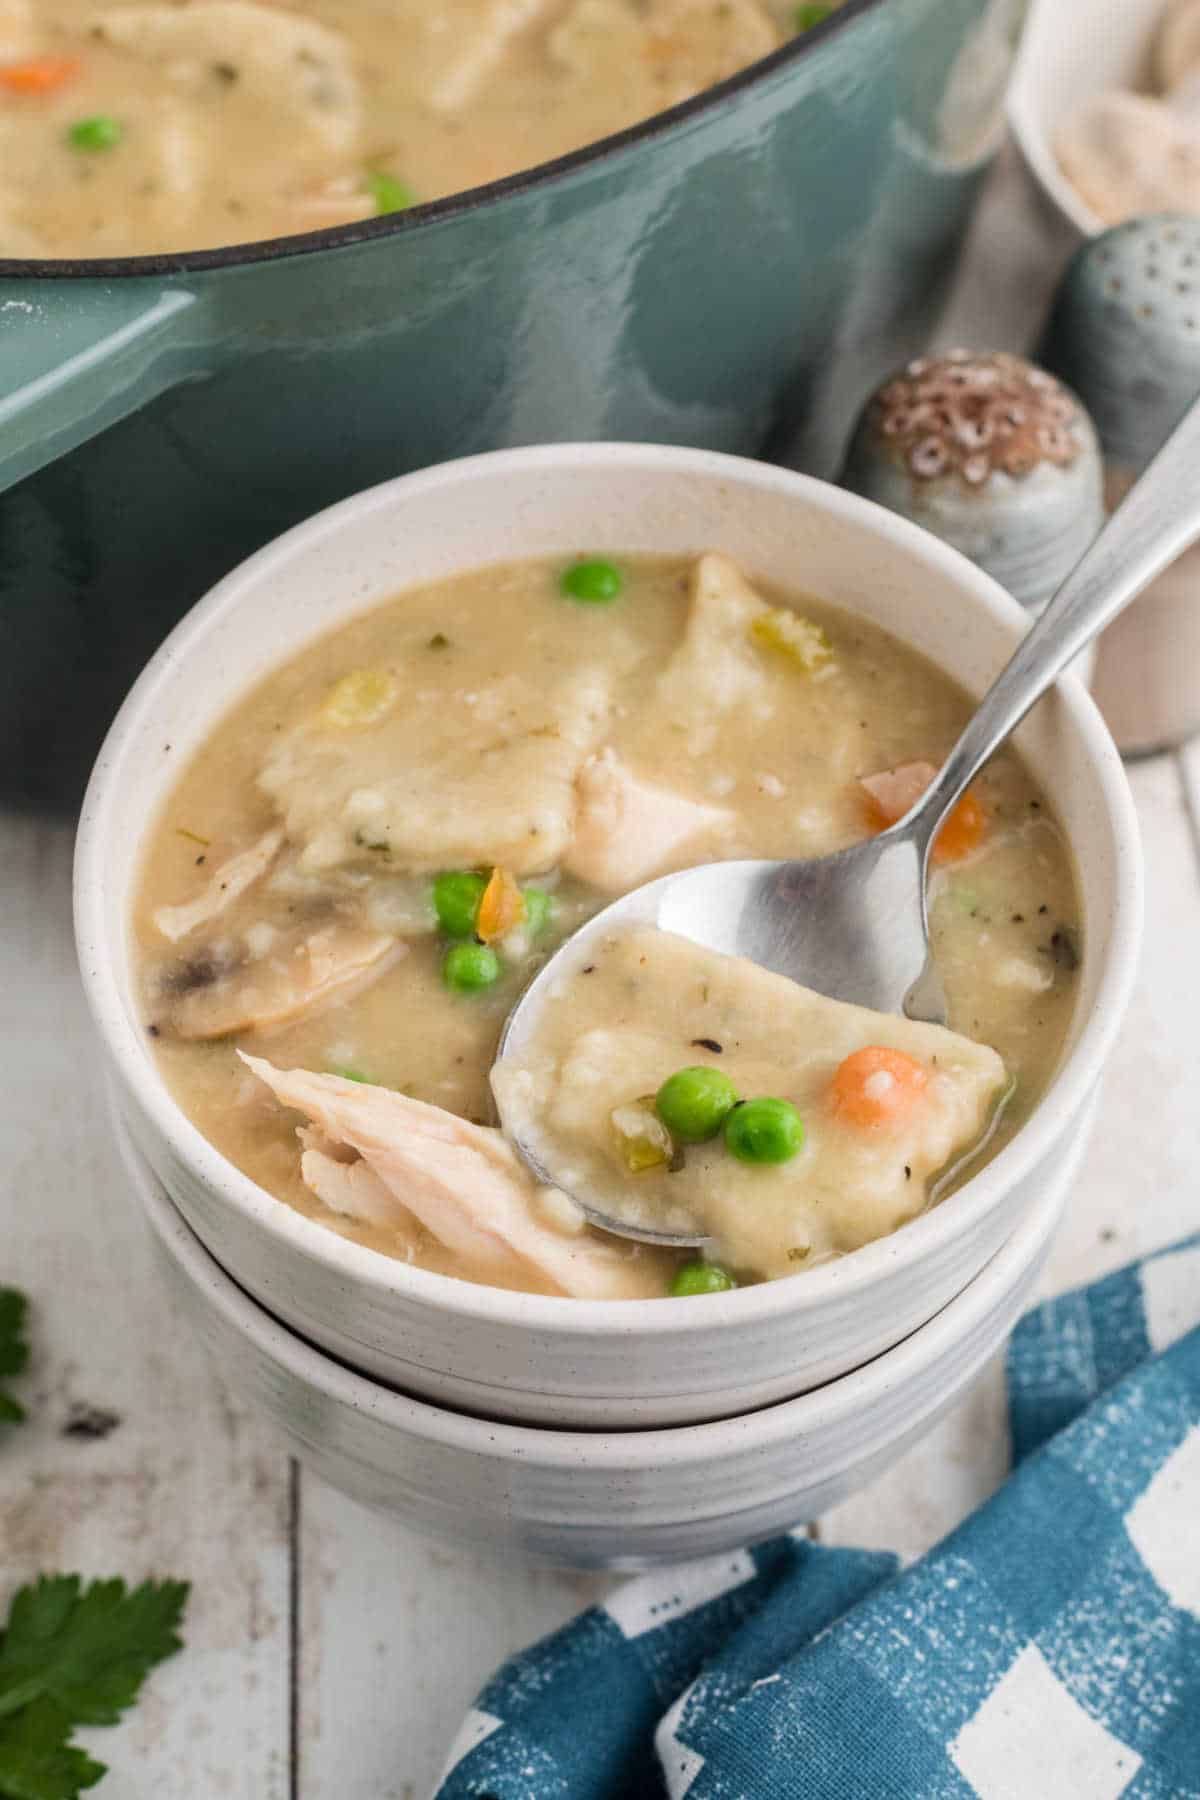 A bowl of chicken dumpling soup with a spoon digging in.